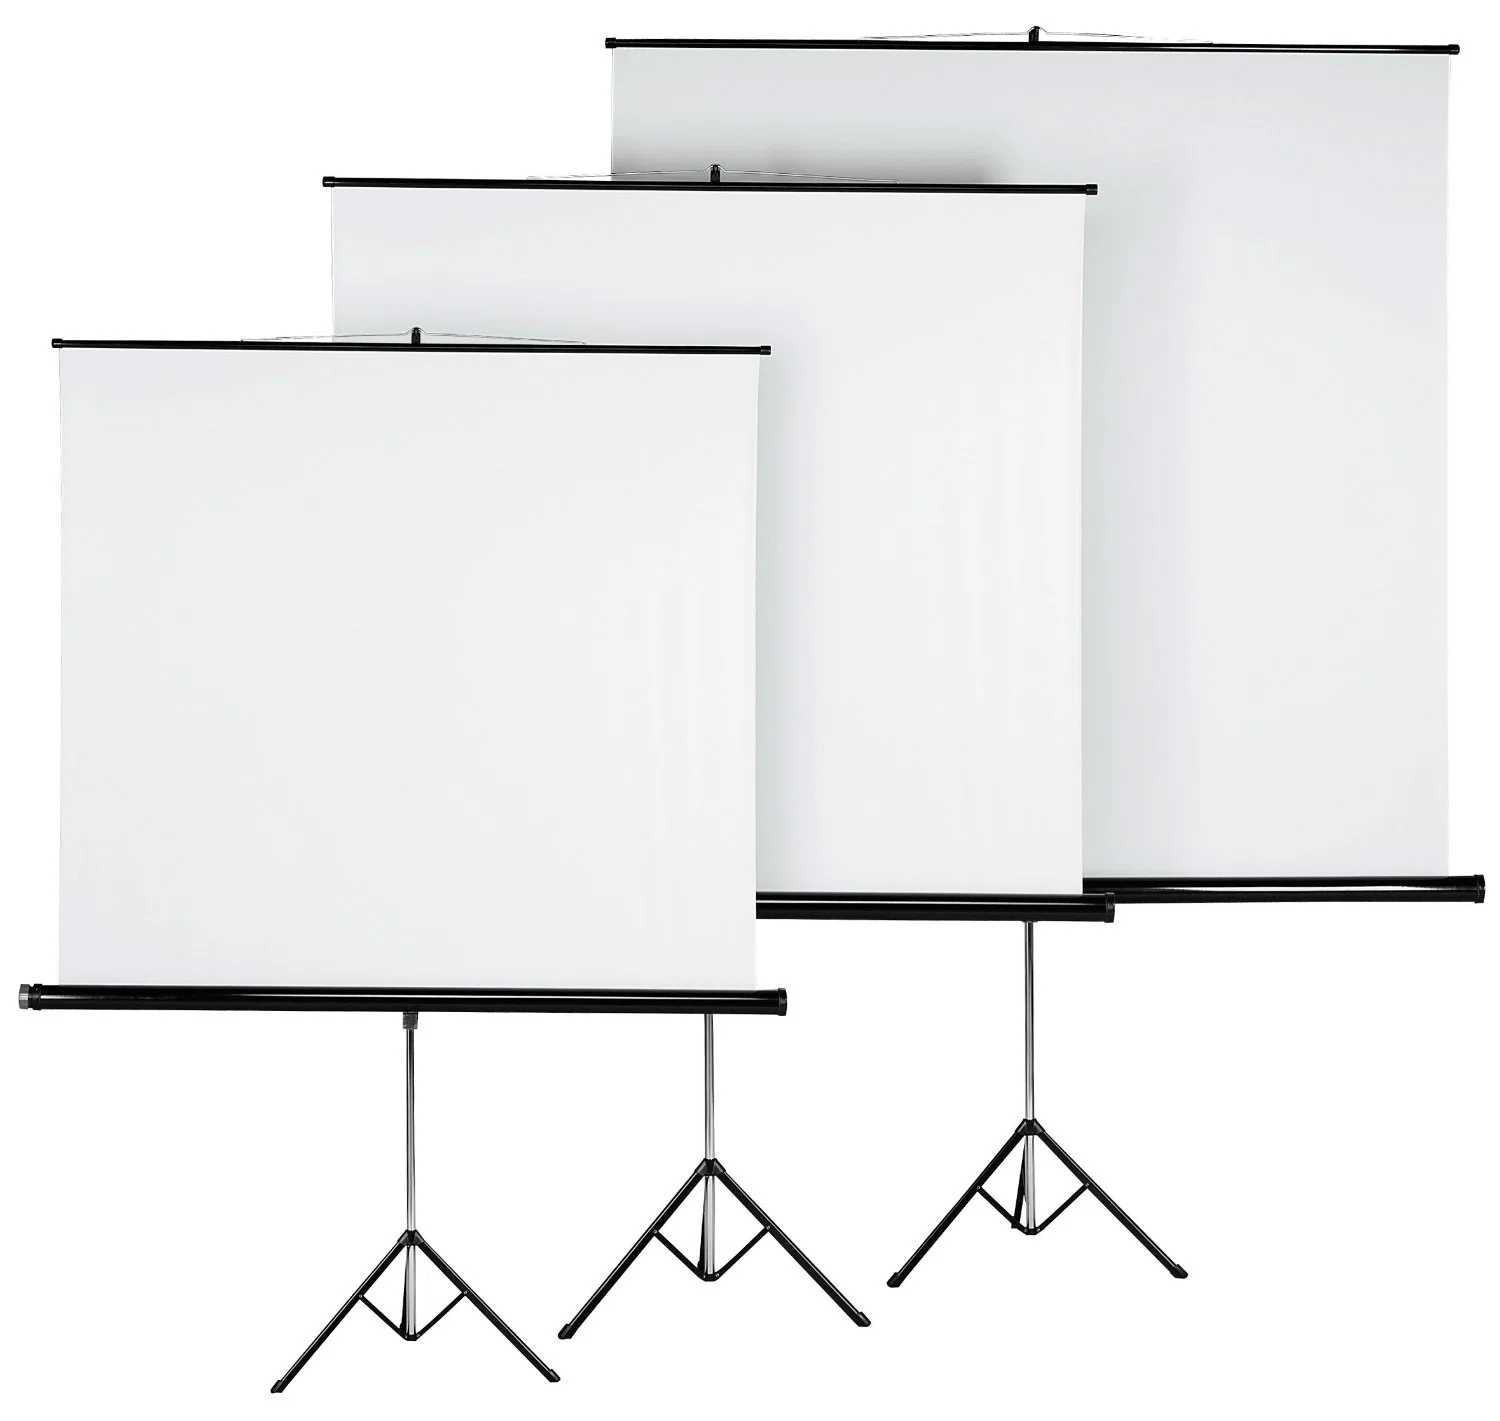 72" Tripod Projection Screen with Matte White Fabric